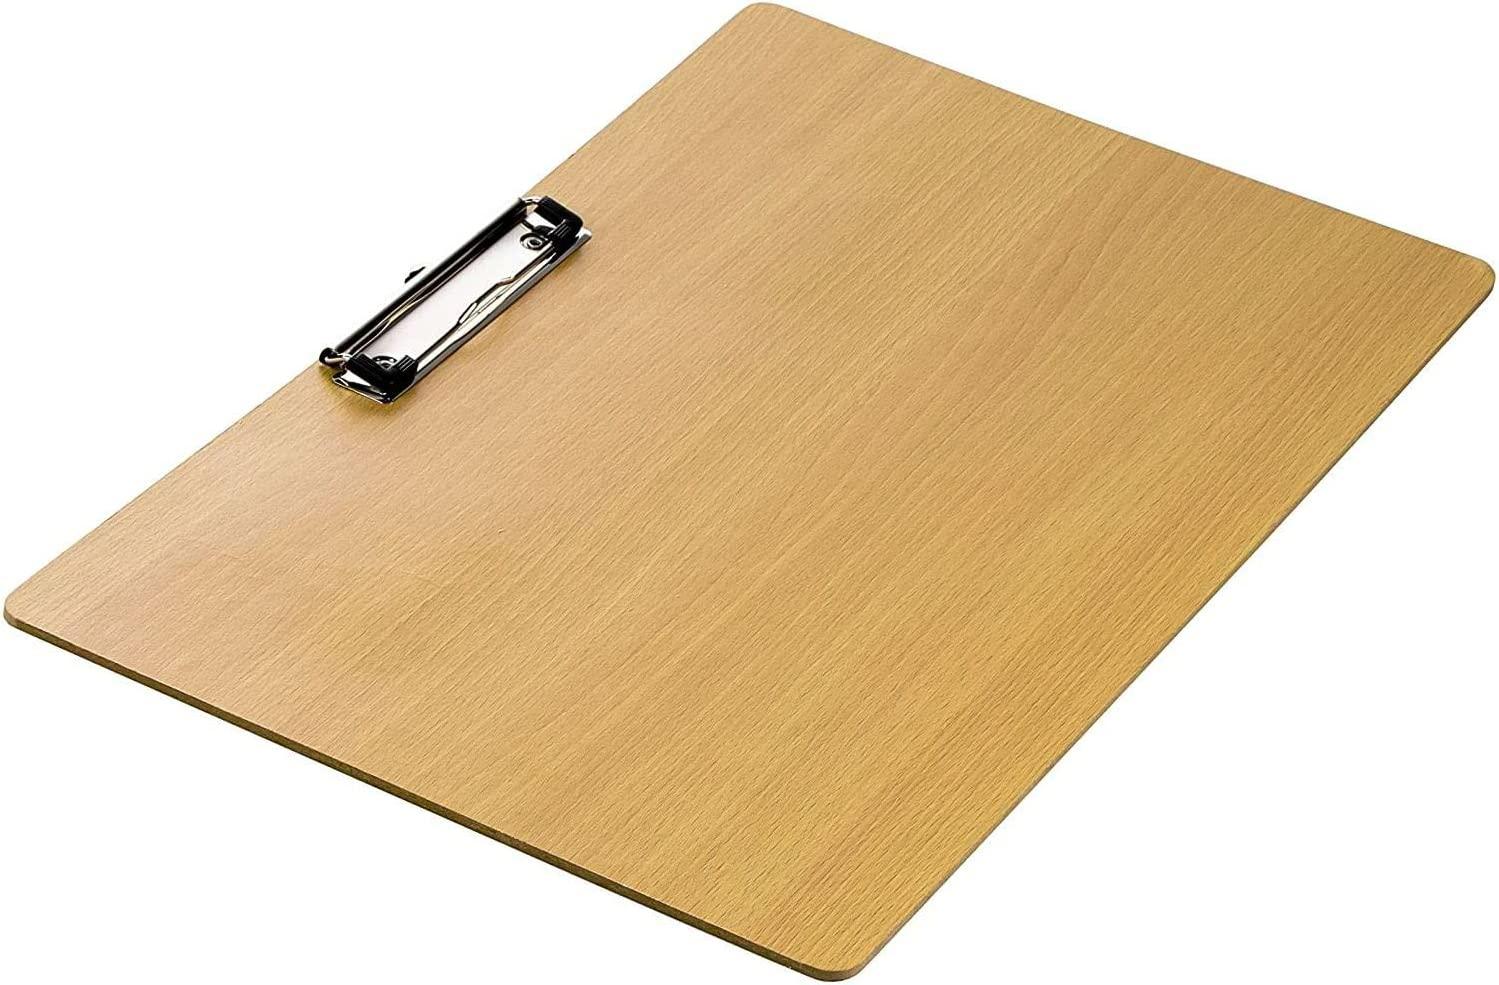 Large Landscape Clipboard, Wooden Lap Board for Drawing and